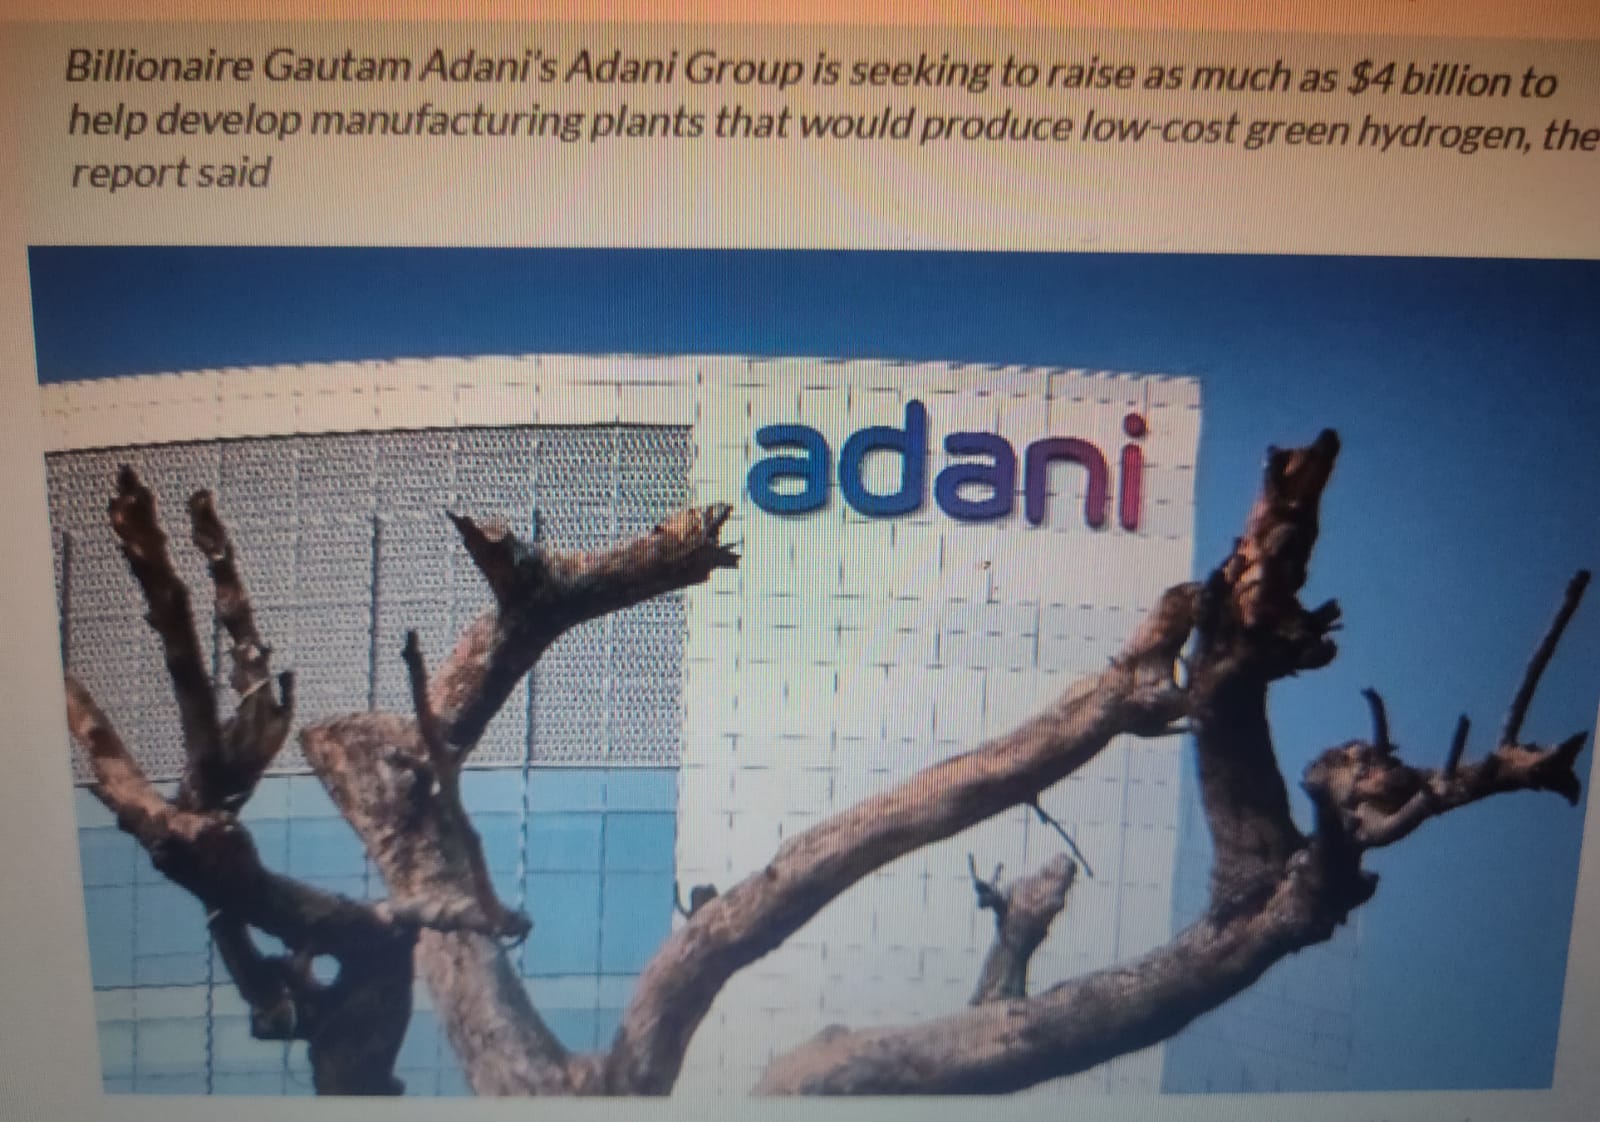 Adani’s to Raise $2.6B Funding to Bolster Its Foray into Green Hydrogen